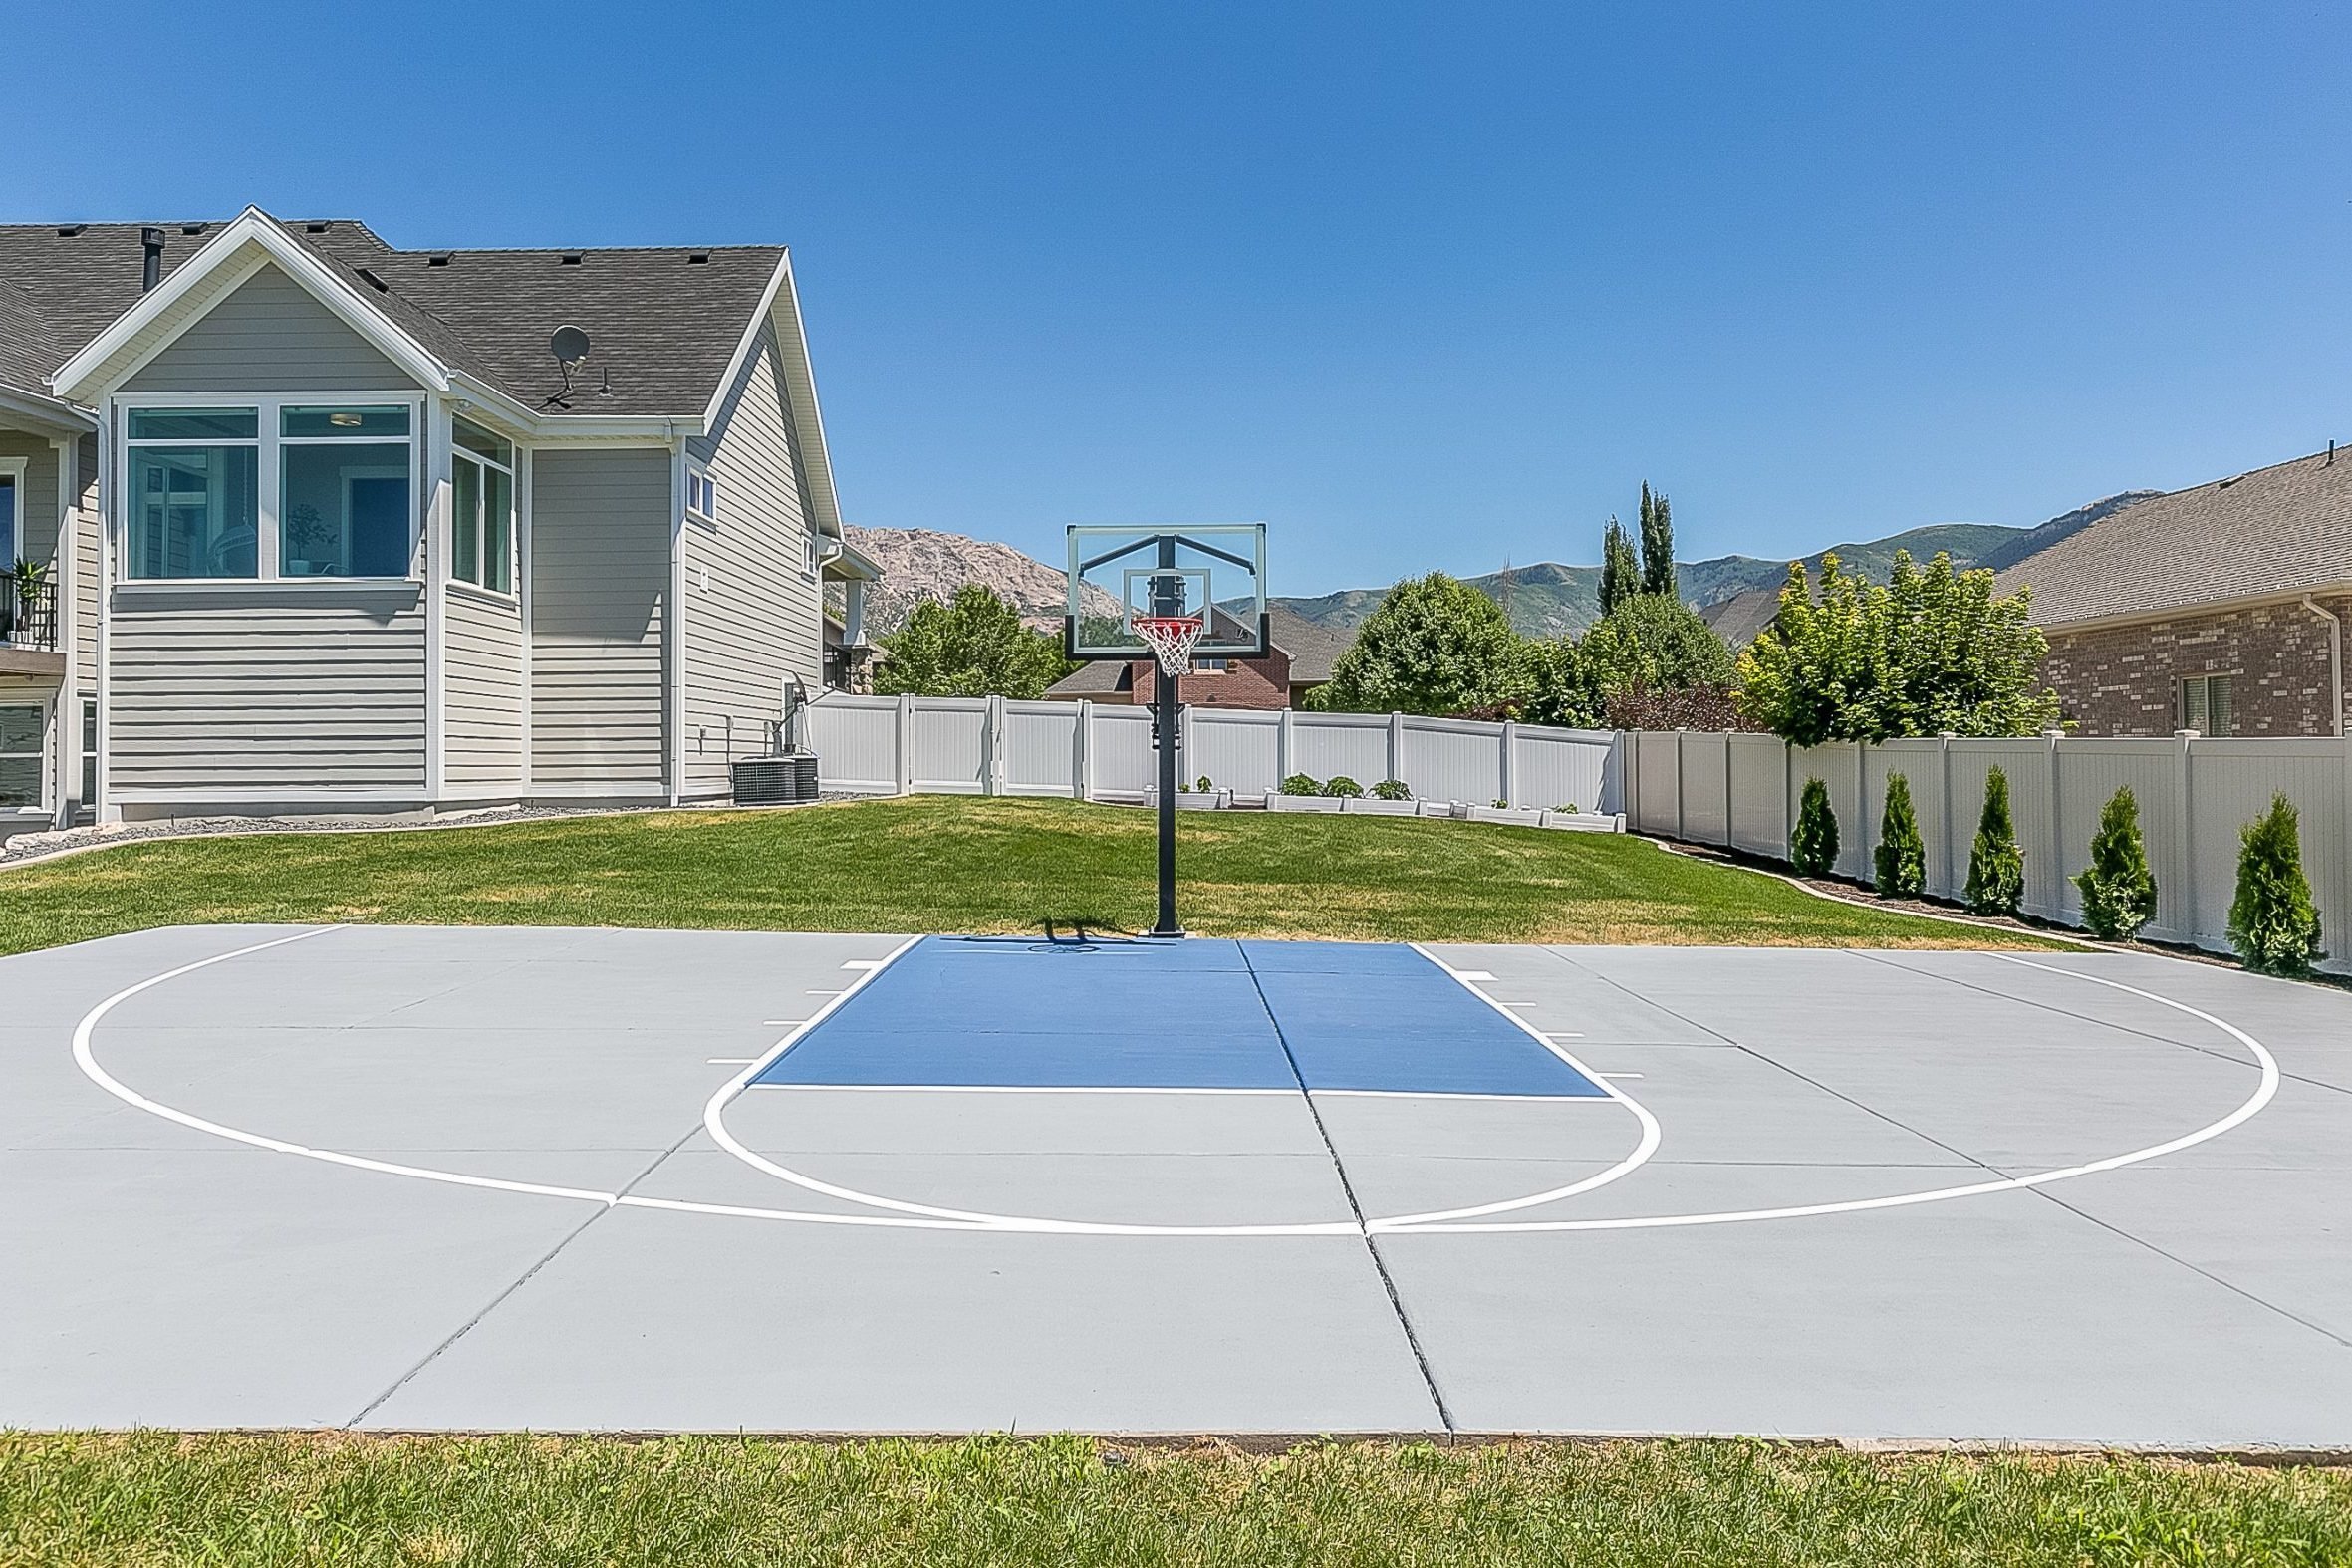 A Guide for Building Your Own Backyard Basketball Court